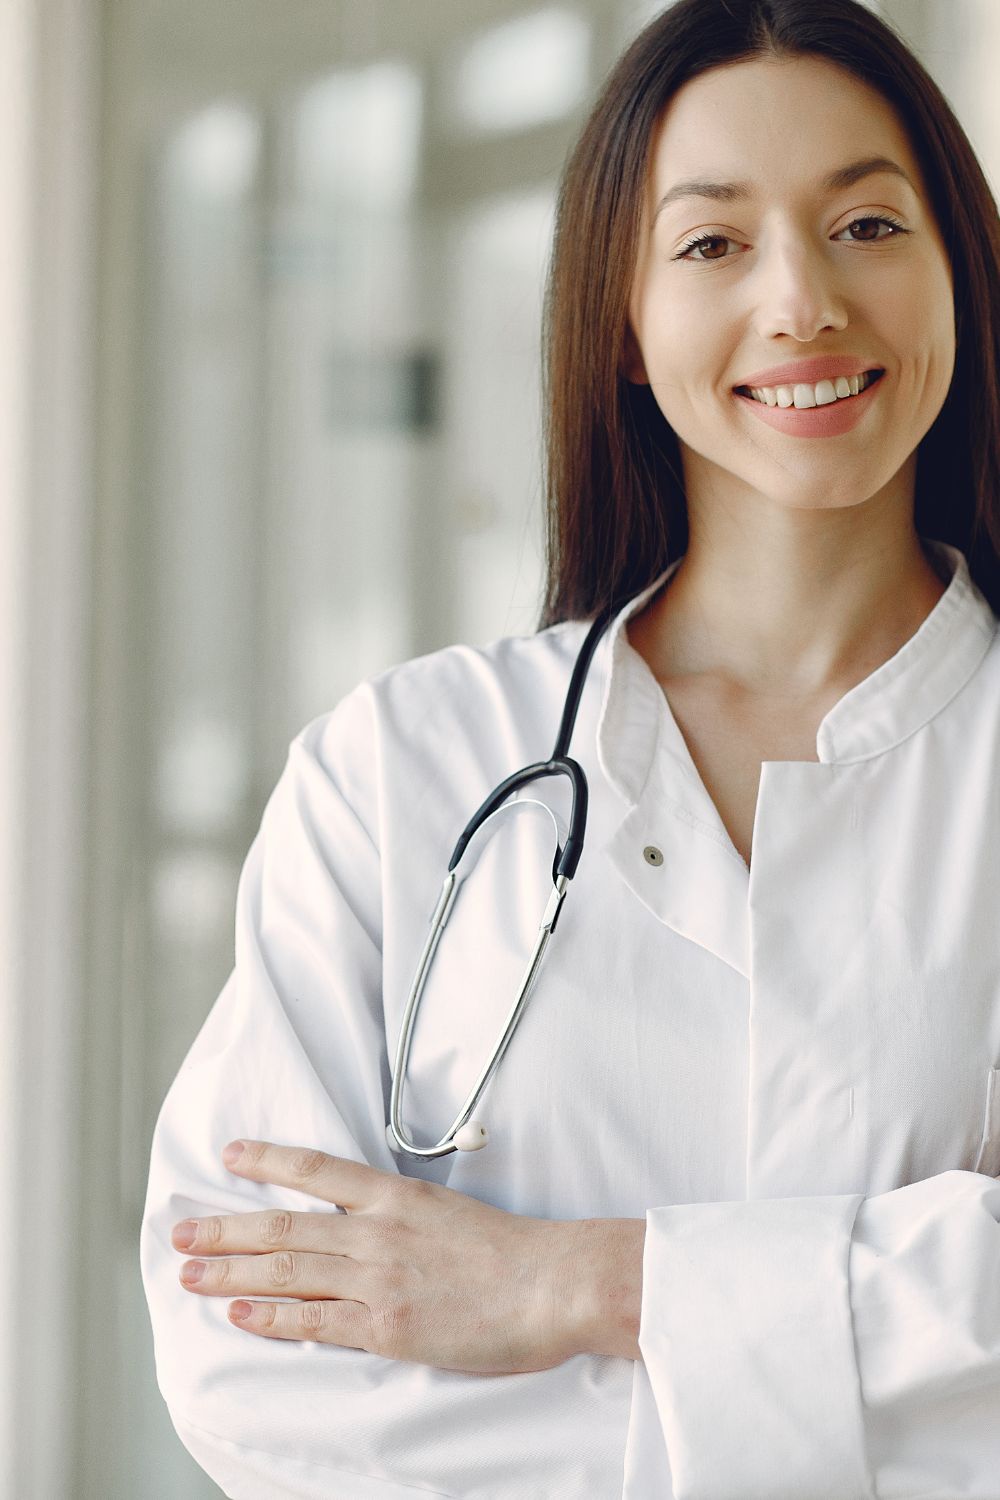 How To Find A Gynecologist 6 Questions To Ask On Your First Visit  